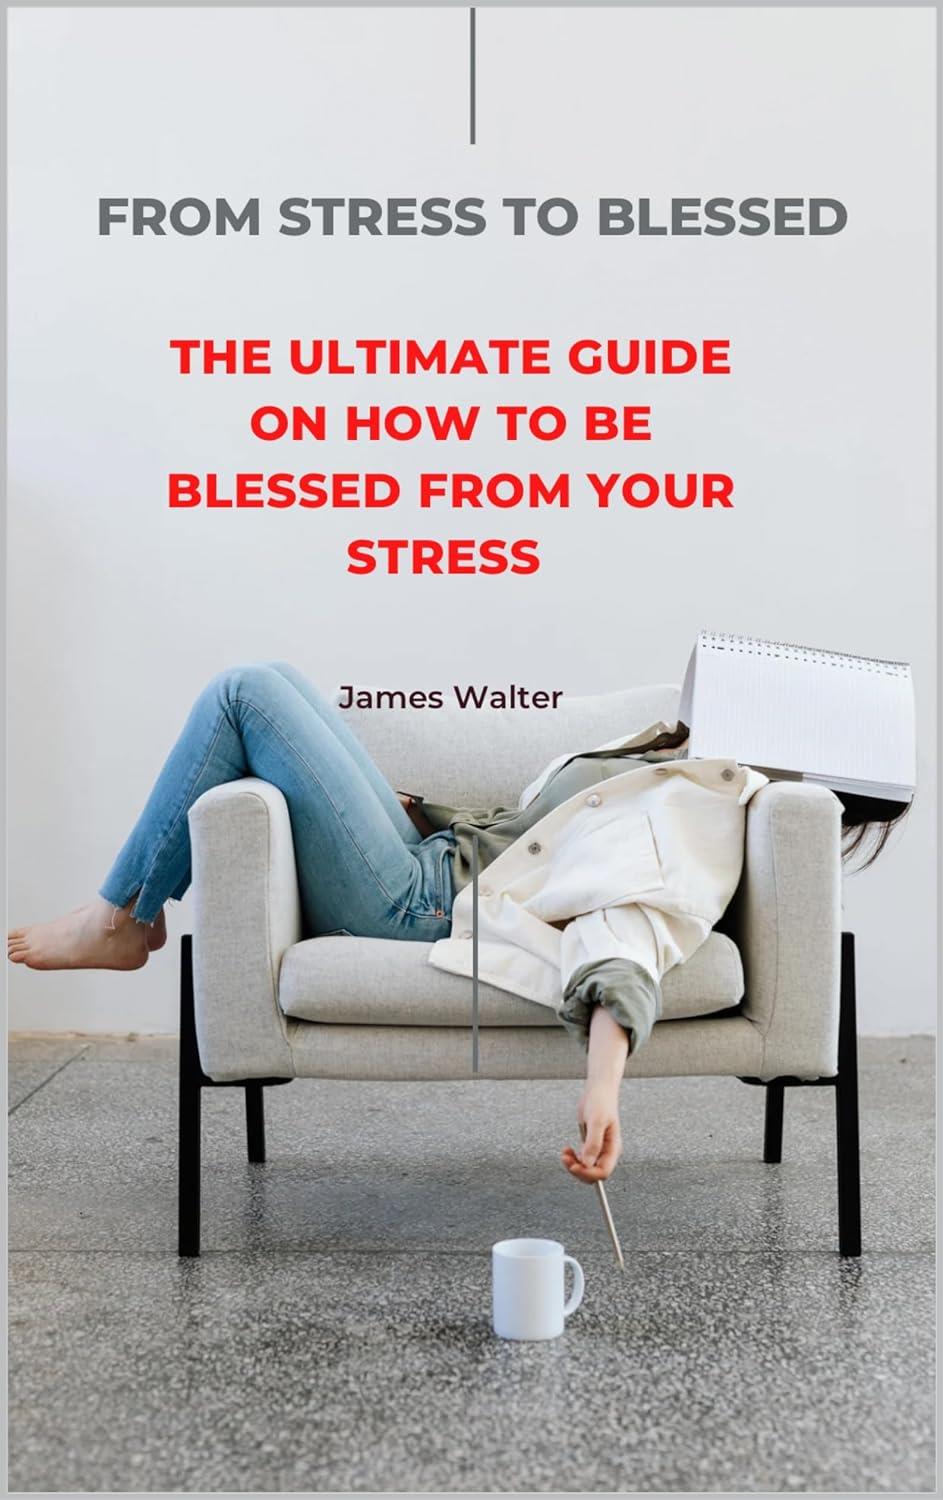 FROM STRESS TO BLESSED: the ultimate guide on how to be blessed from your stress